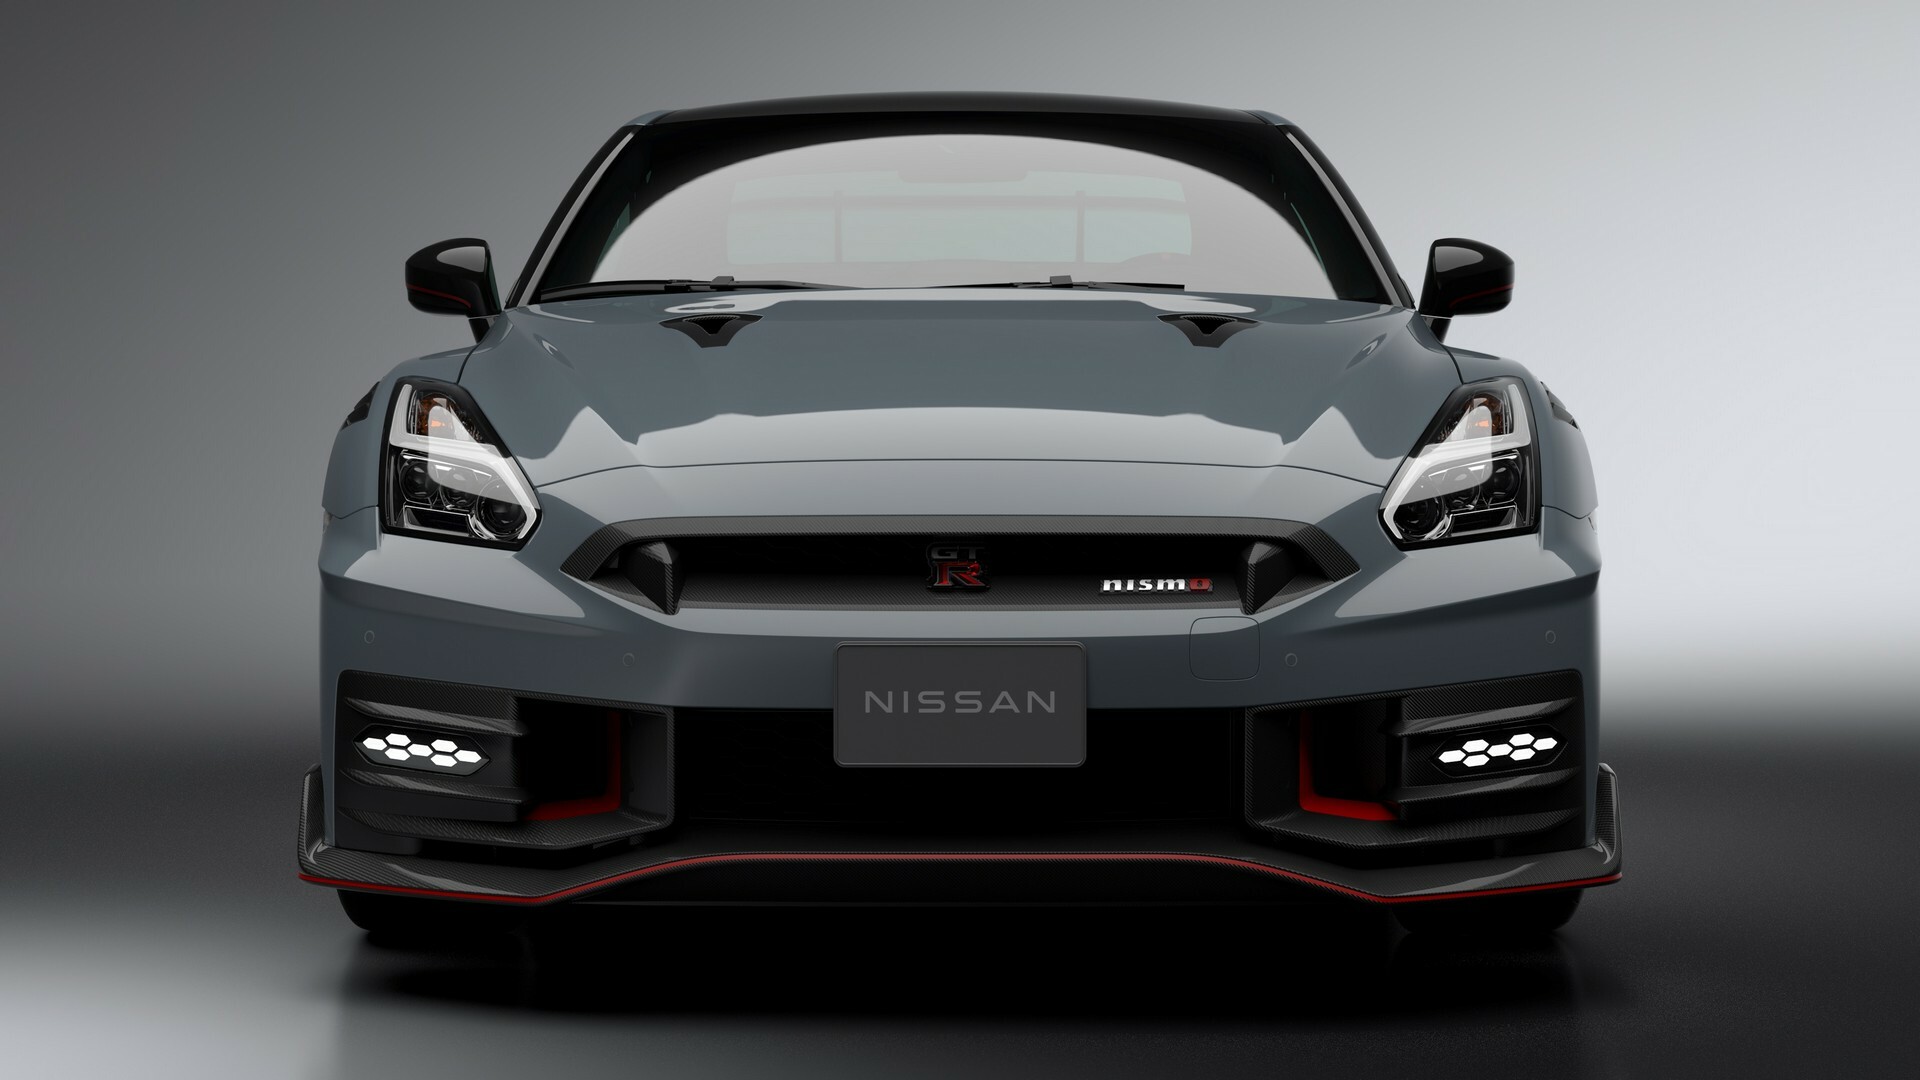 2024 Nissan GT-R Up Close: Nipping and Tucking